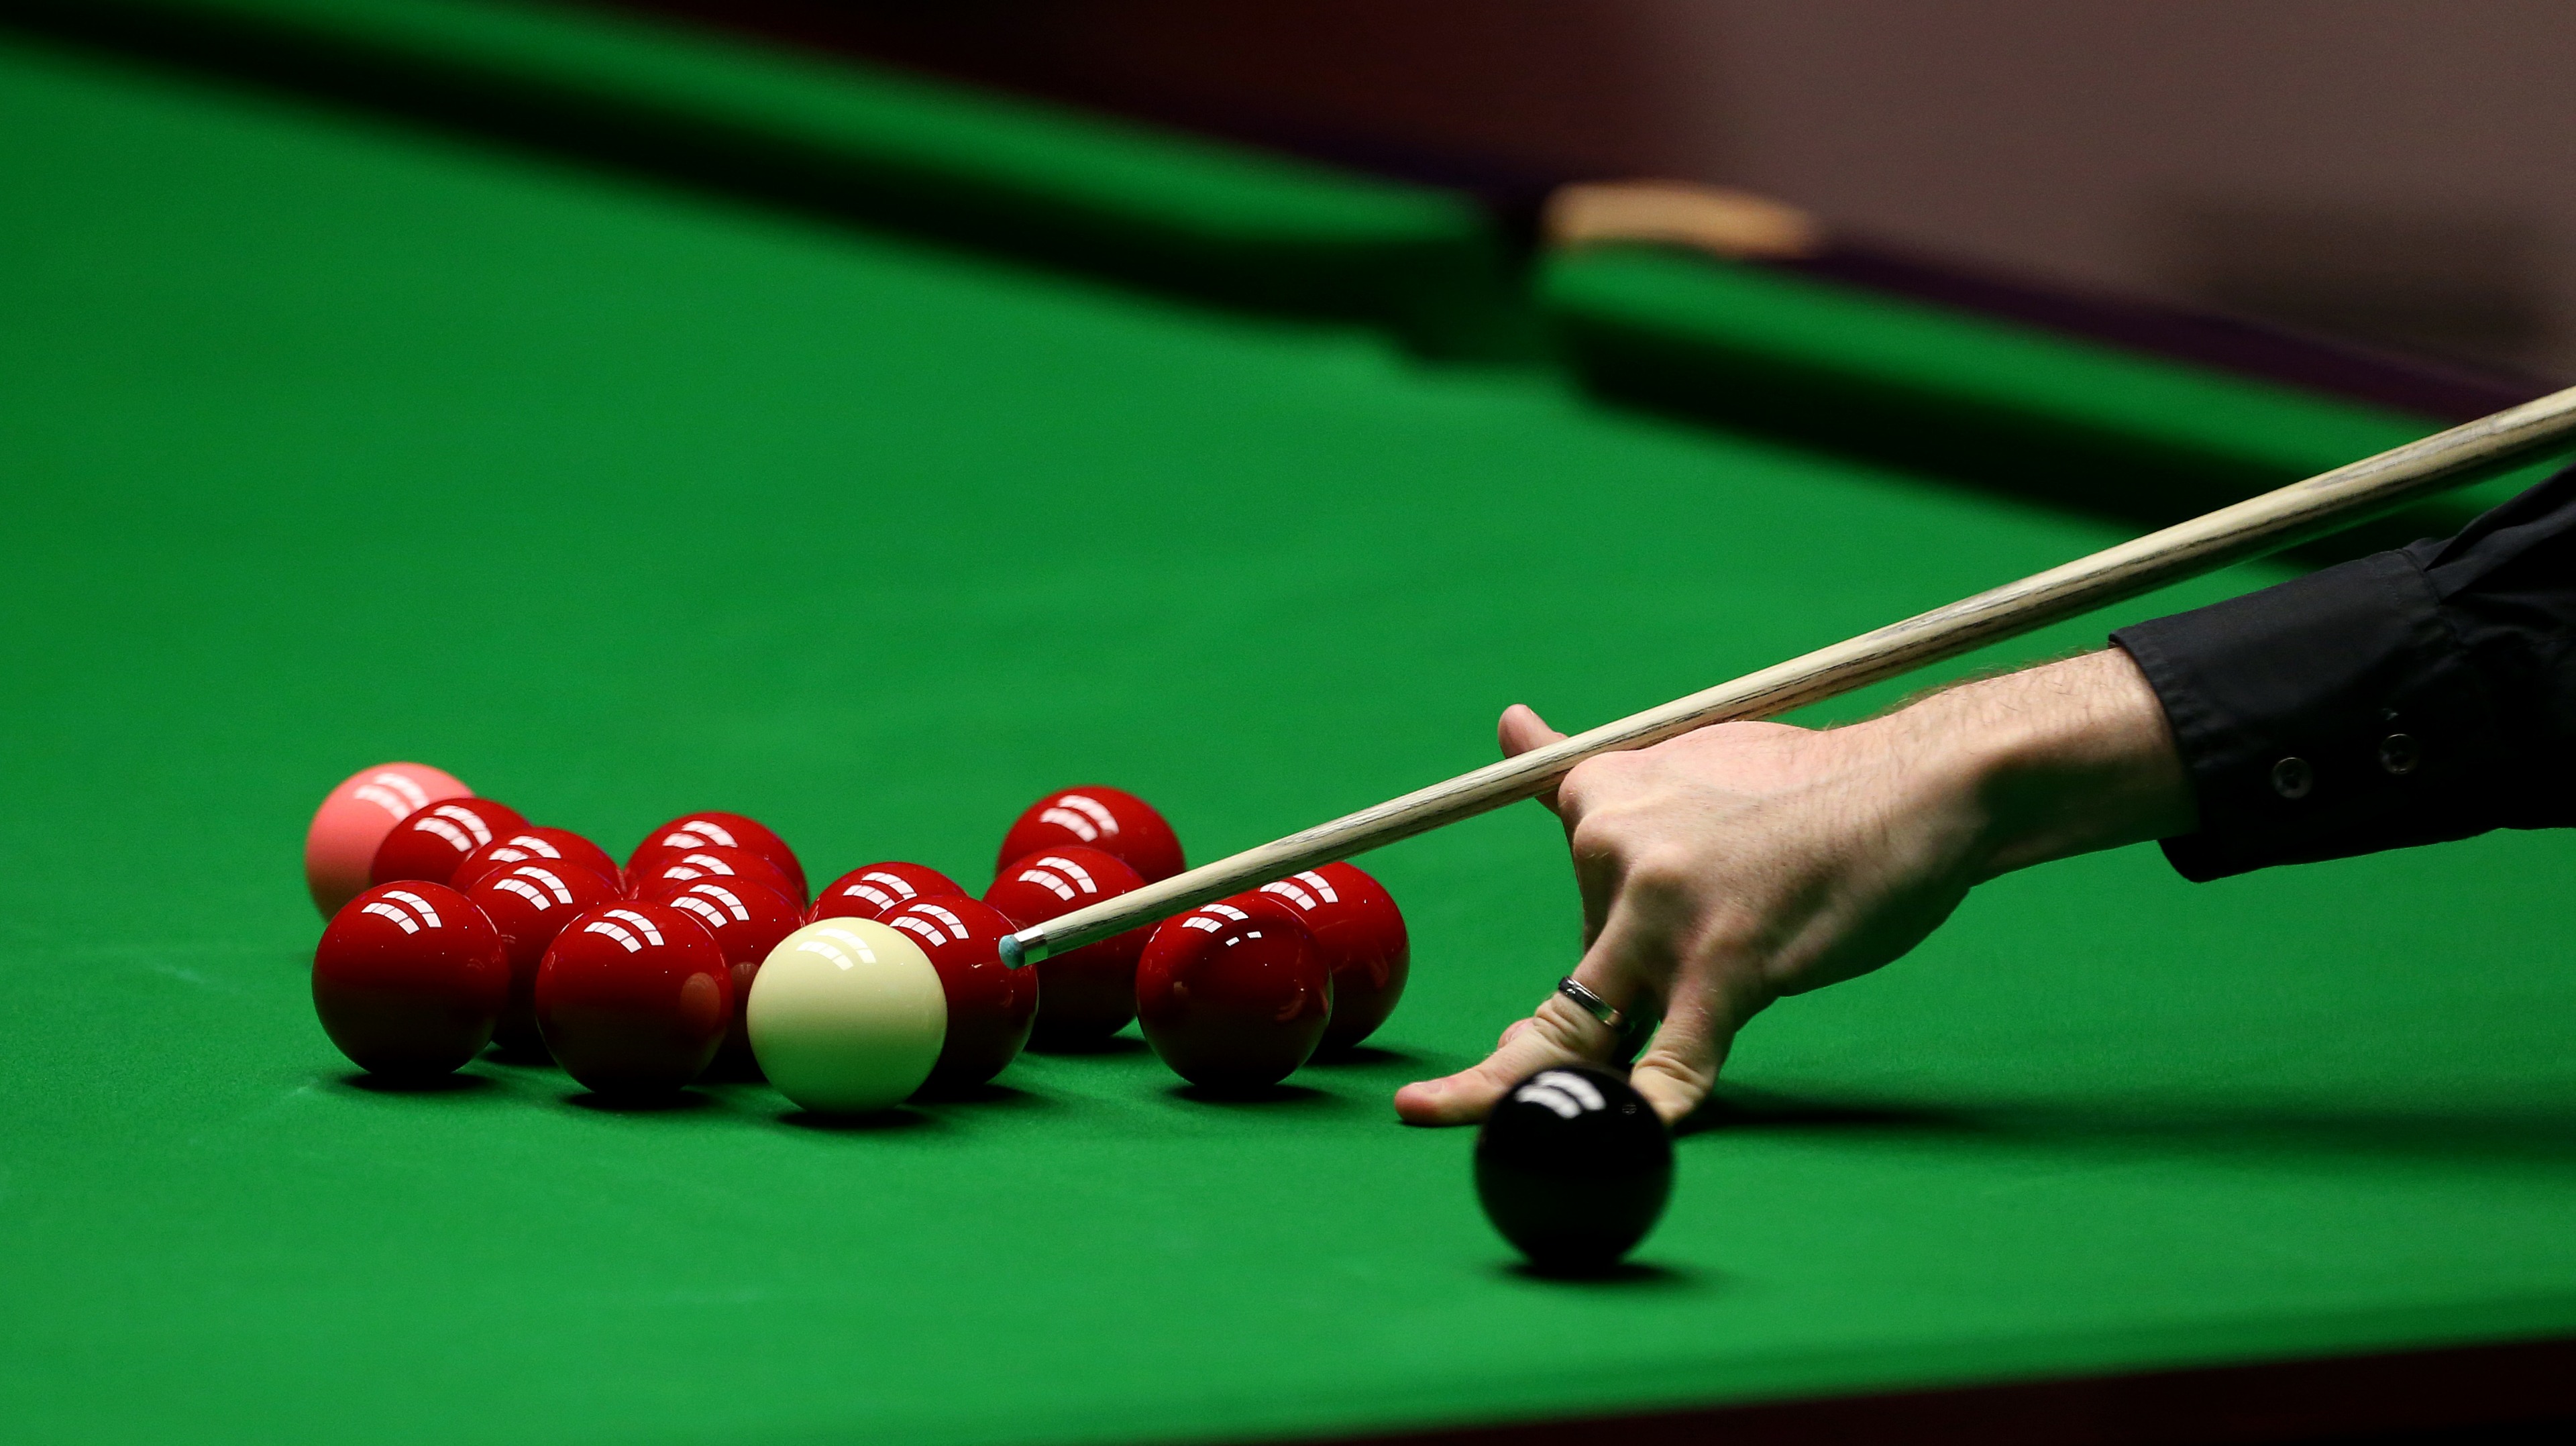 Live UK Sport returns to free-to-air TV as ITV cues up Snooker ITV News